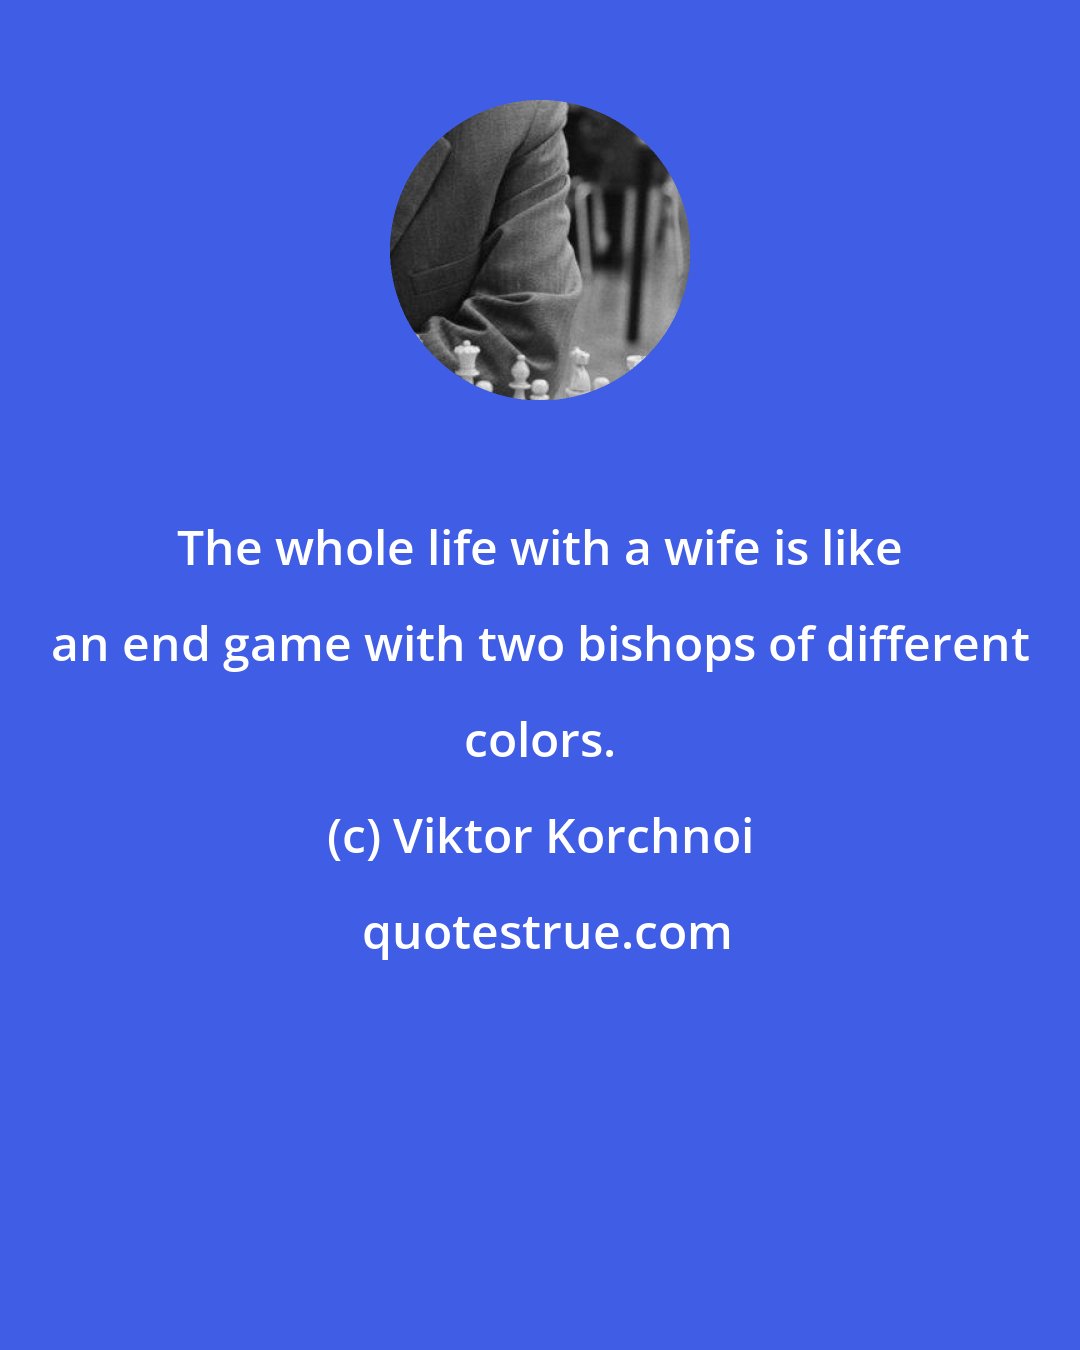 Viktor Korchnoi: The whole life with a wife is like an end game with two bishops of different colors.